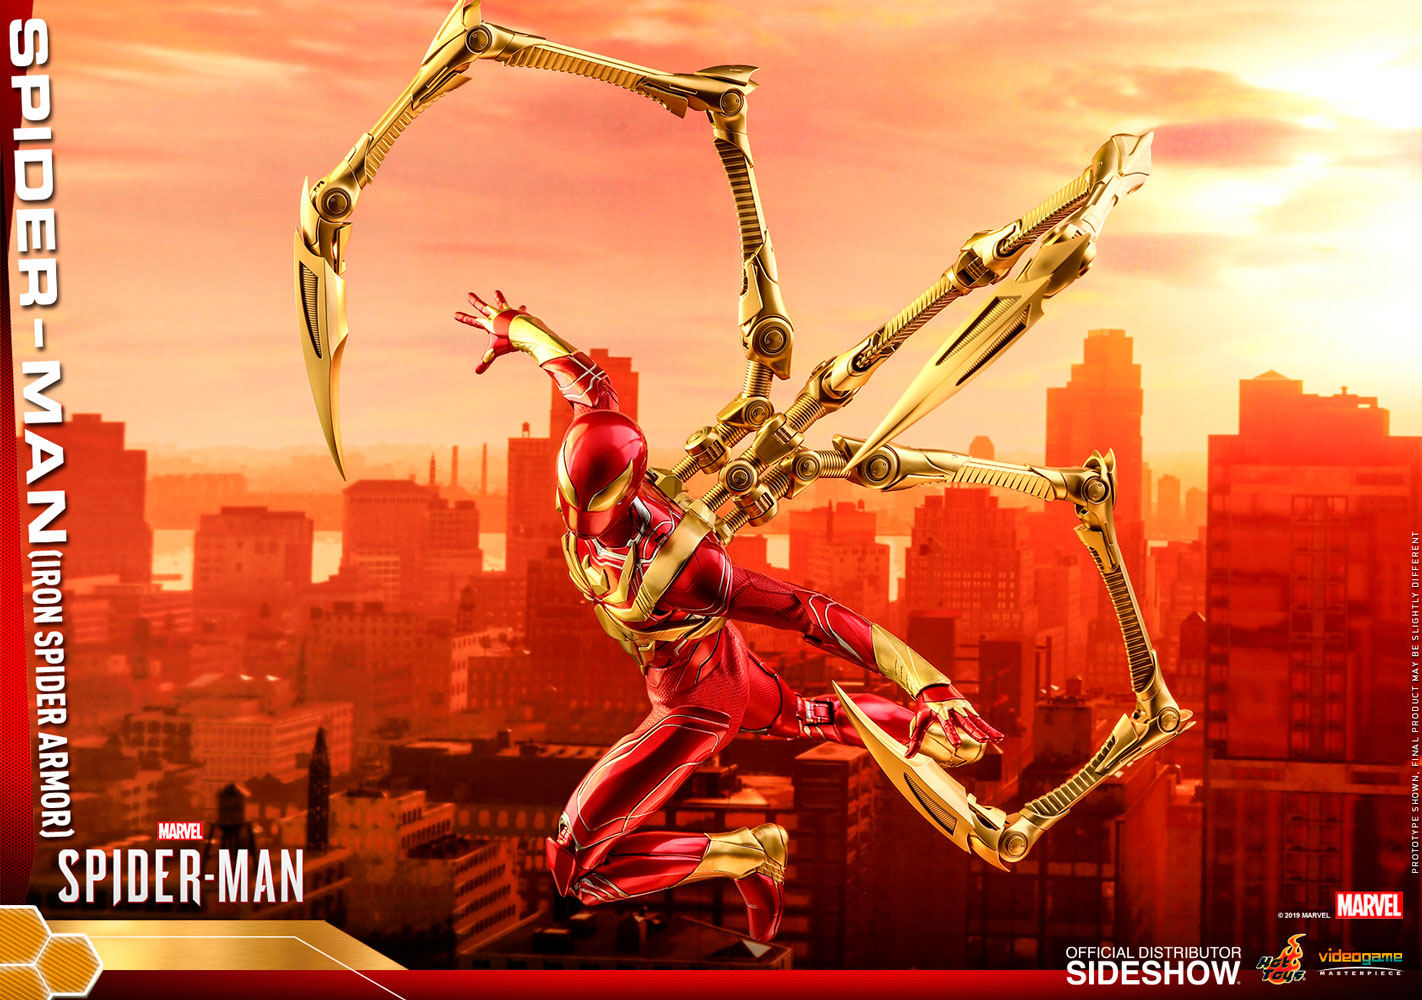 Hot Toys Spider-Man (Iron Spider Armor) 1/6th scale Collectible Figure  VGM38 - Toys Wonderland